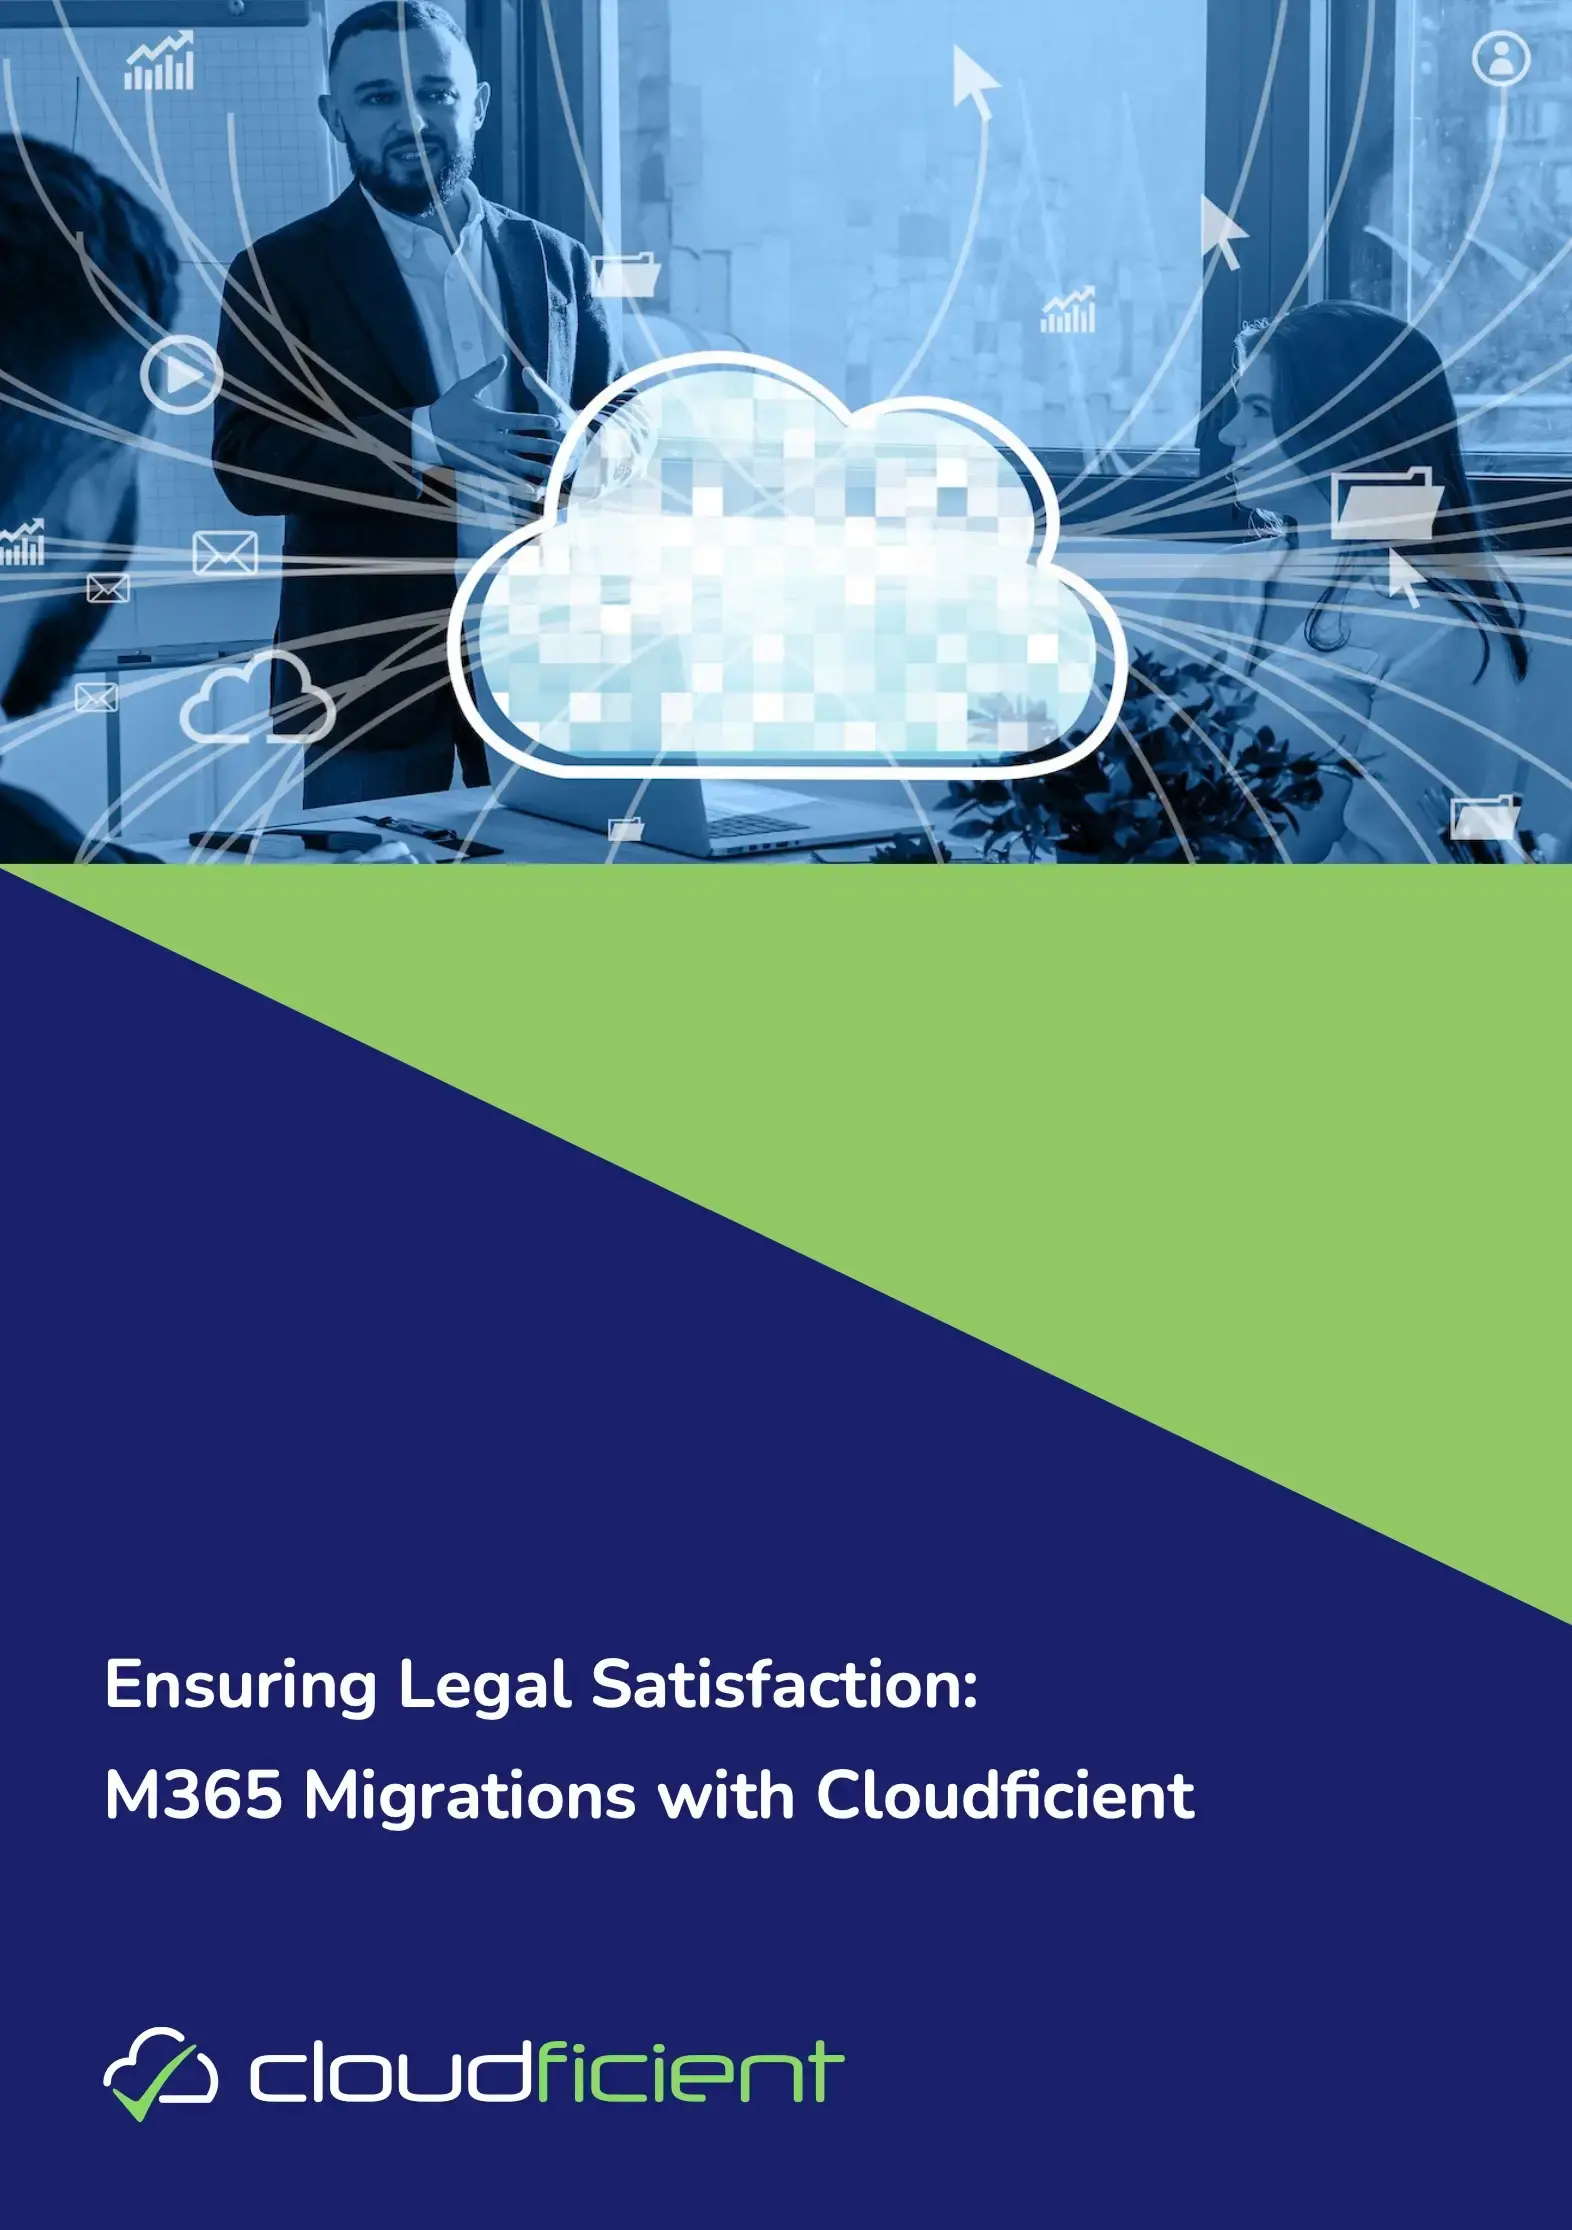 Ensuring Legal Satisfaction - M365 Migrations with Cloudficient v0.04.pdf 2024-04-29 at 3.55.44 PM-1